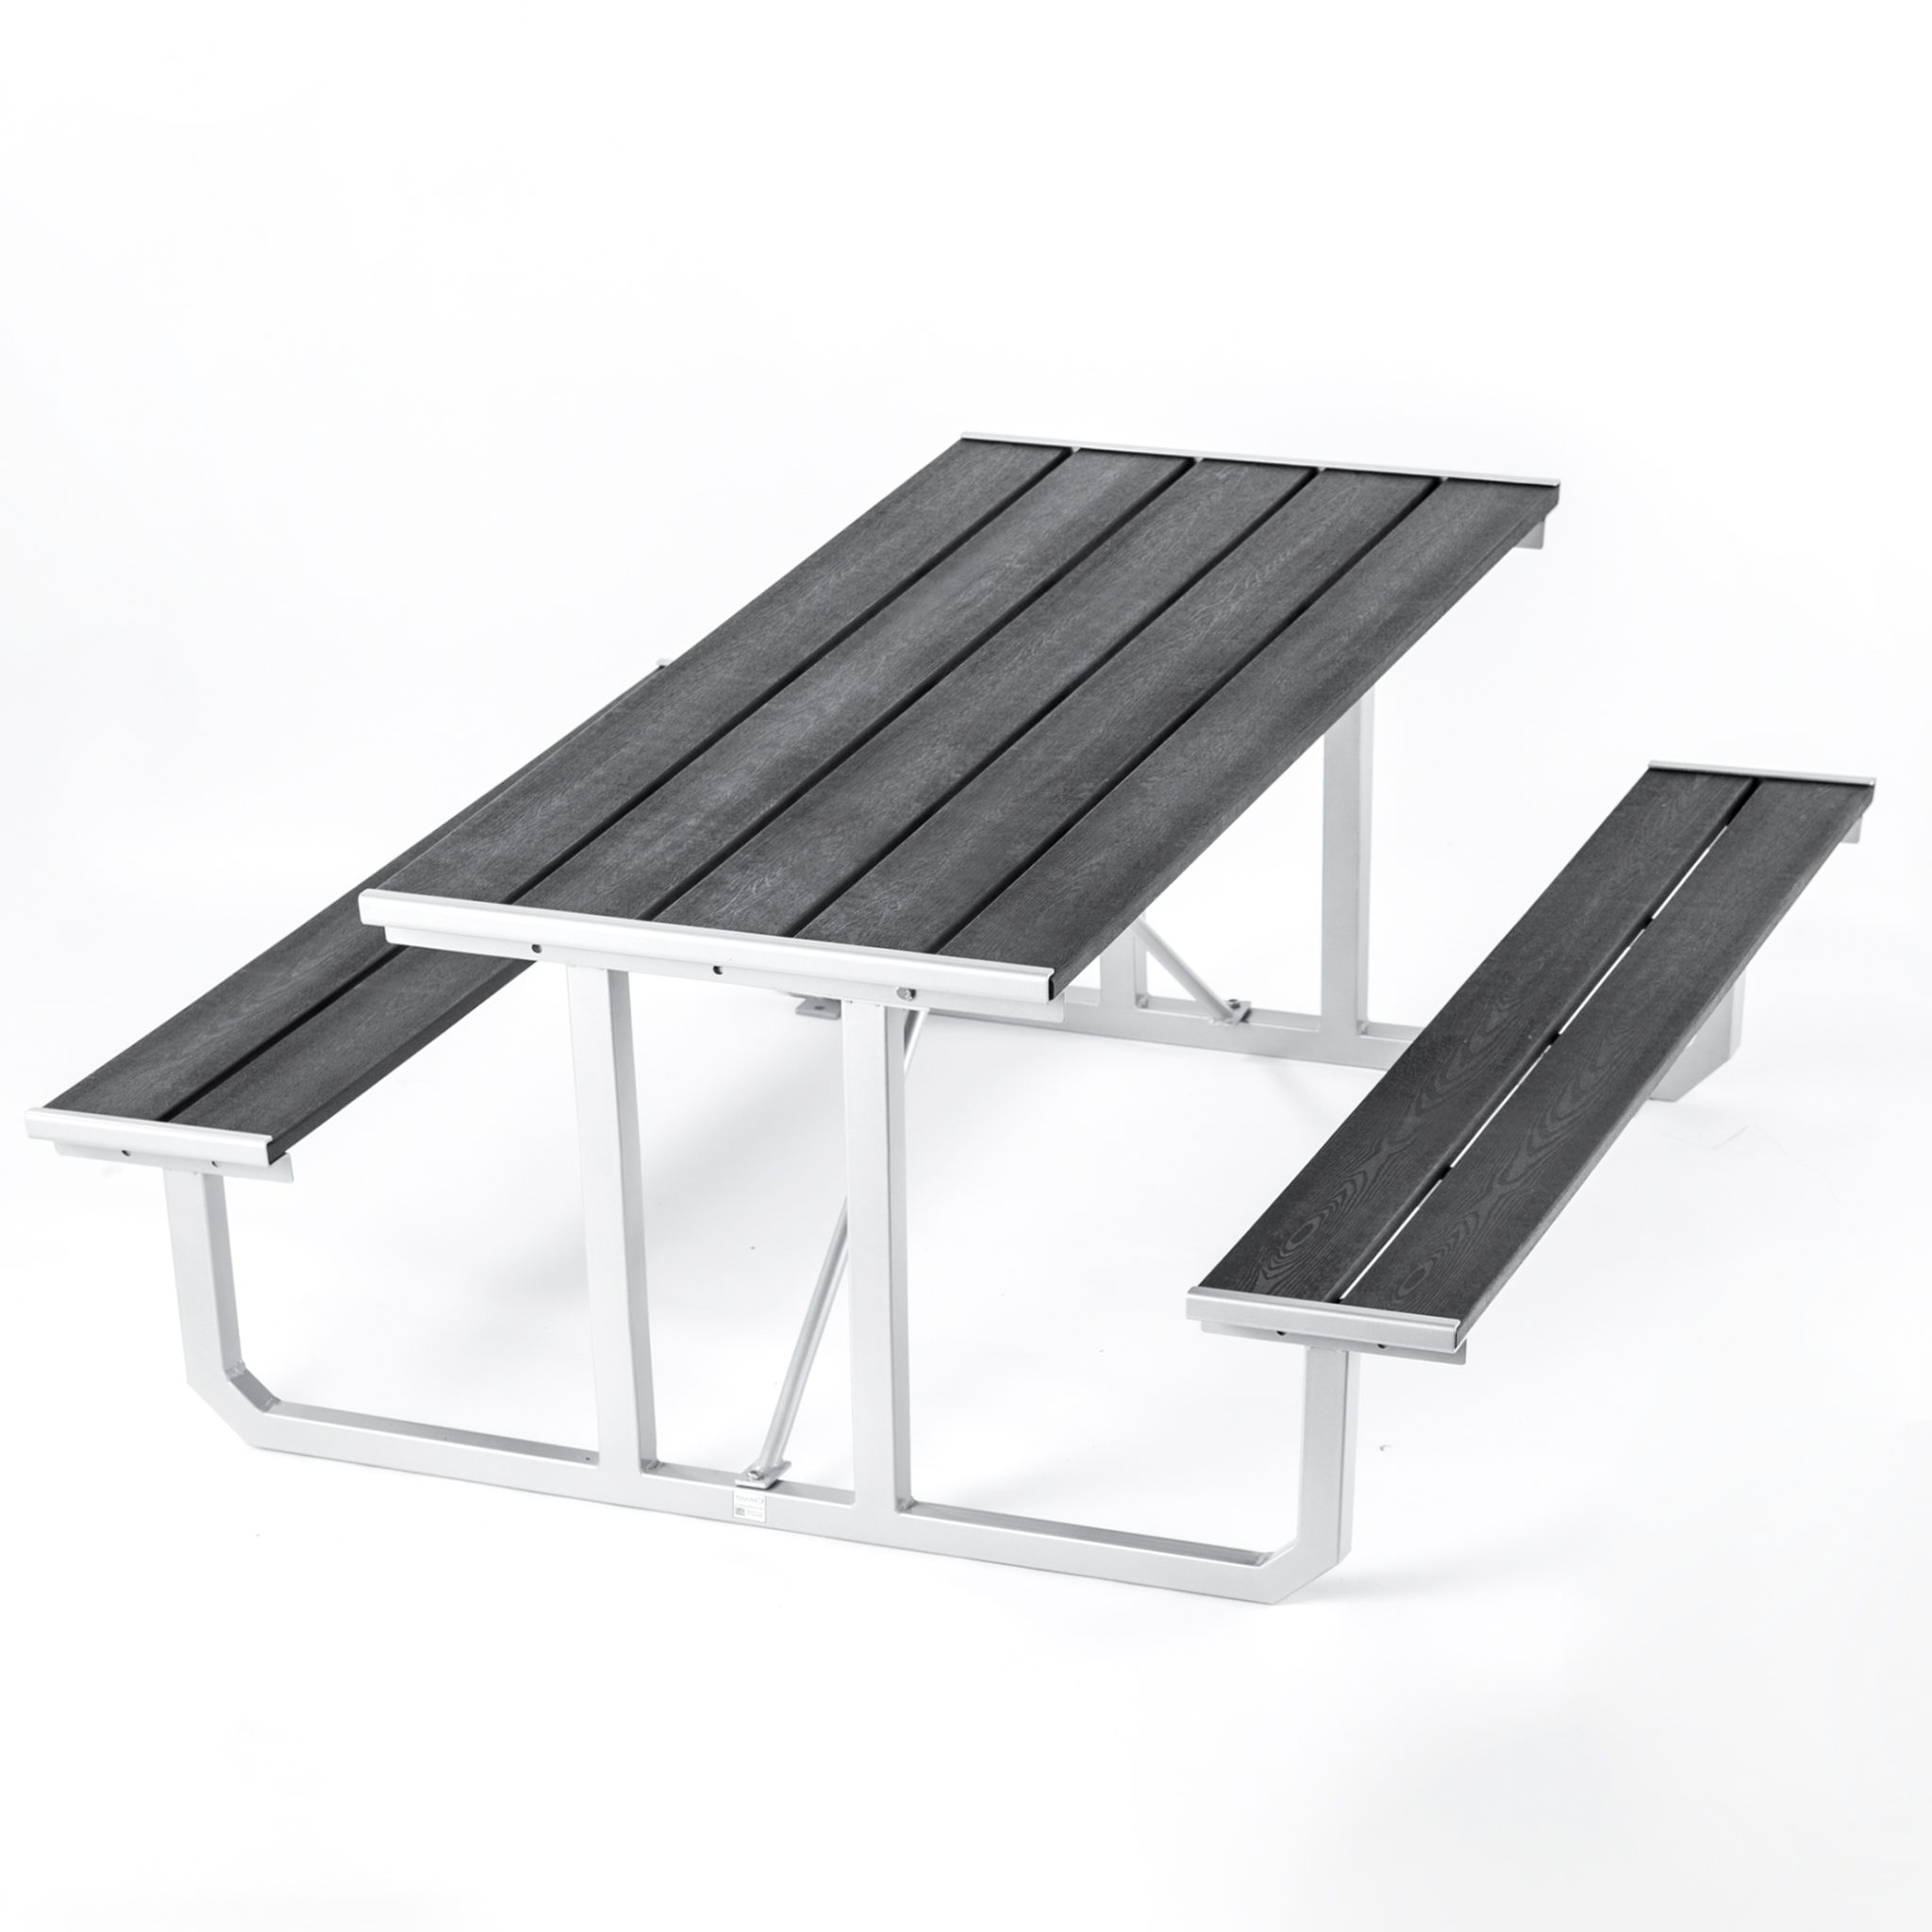 wood composite picnic bench